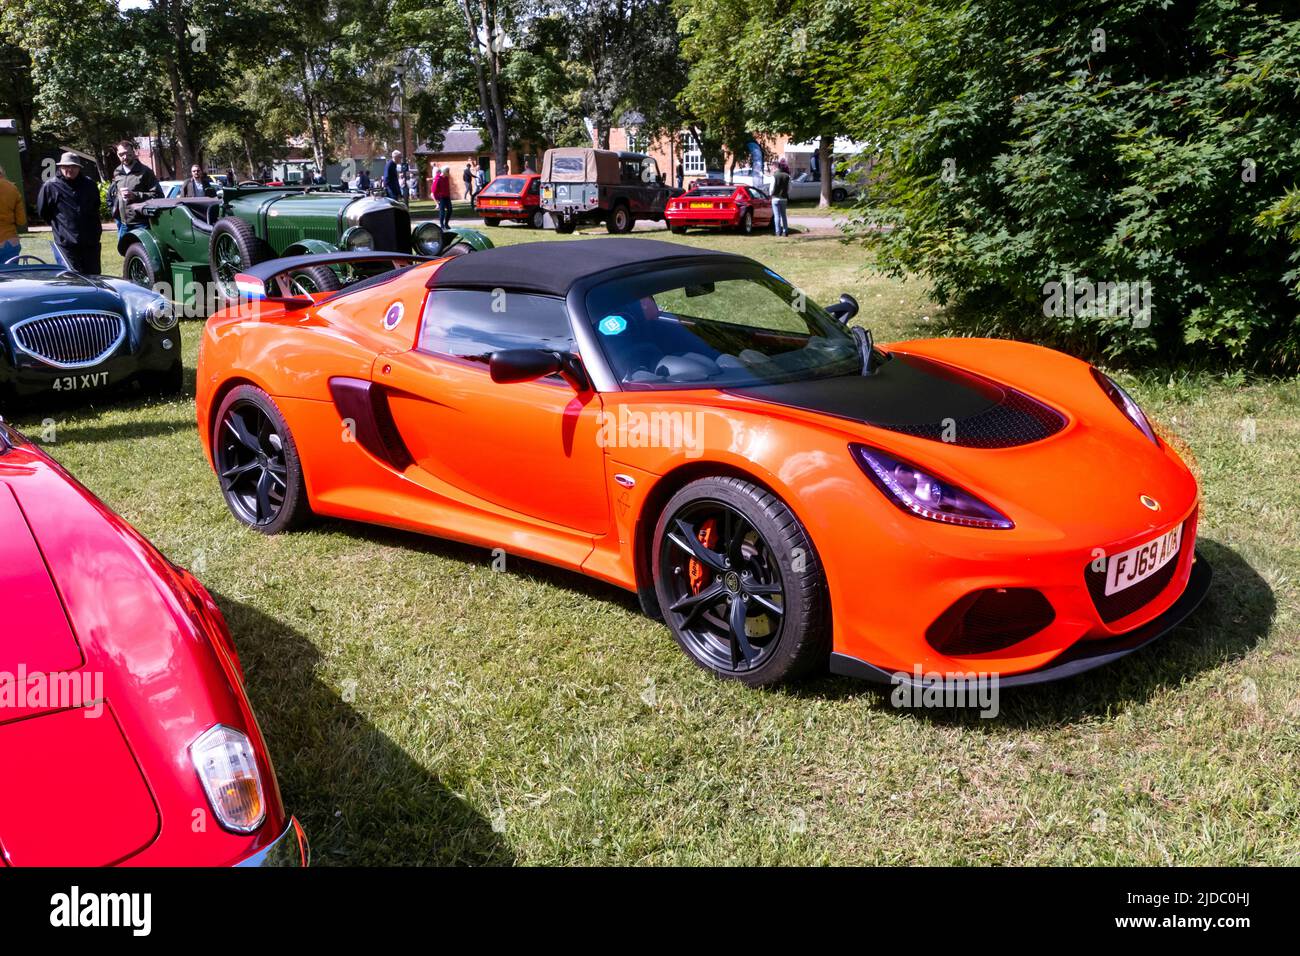 Lotus Elise at the June 2022 Bicester Heritage Scramble classic car event Stock Photo